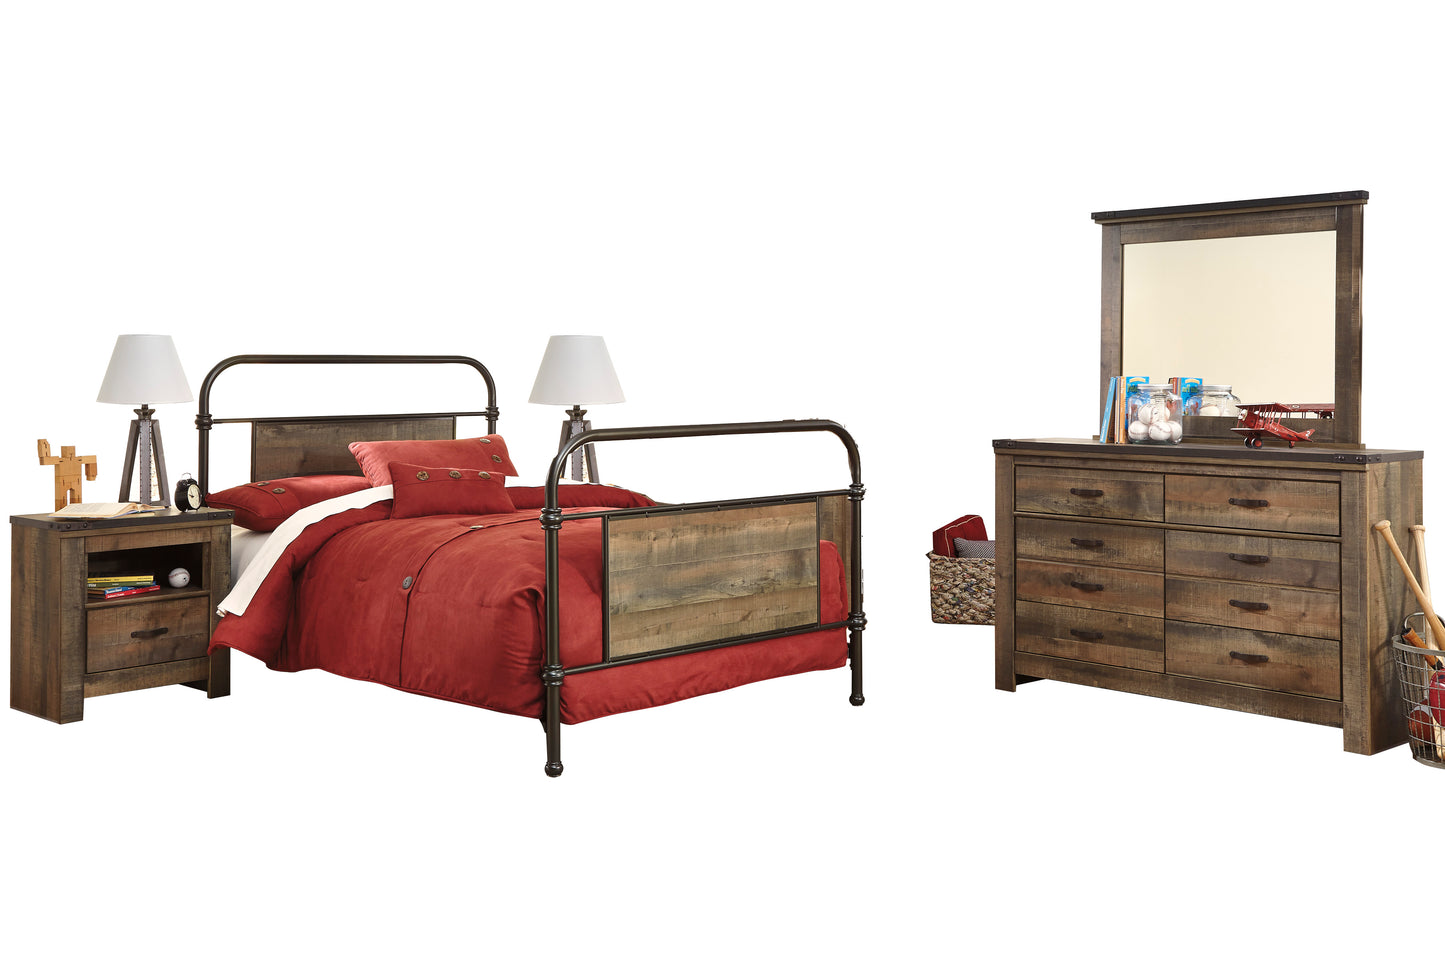 Ashley Trinell 5PC Bedroom Set Twin Metal Bed Two Nightstand Dresser Mirror in Brown